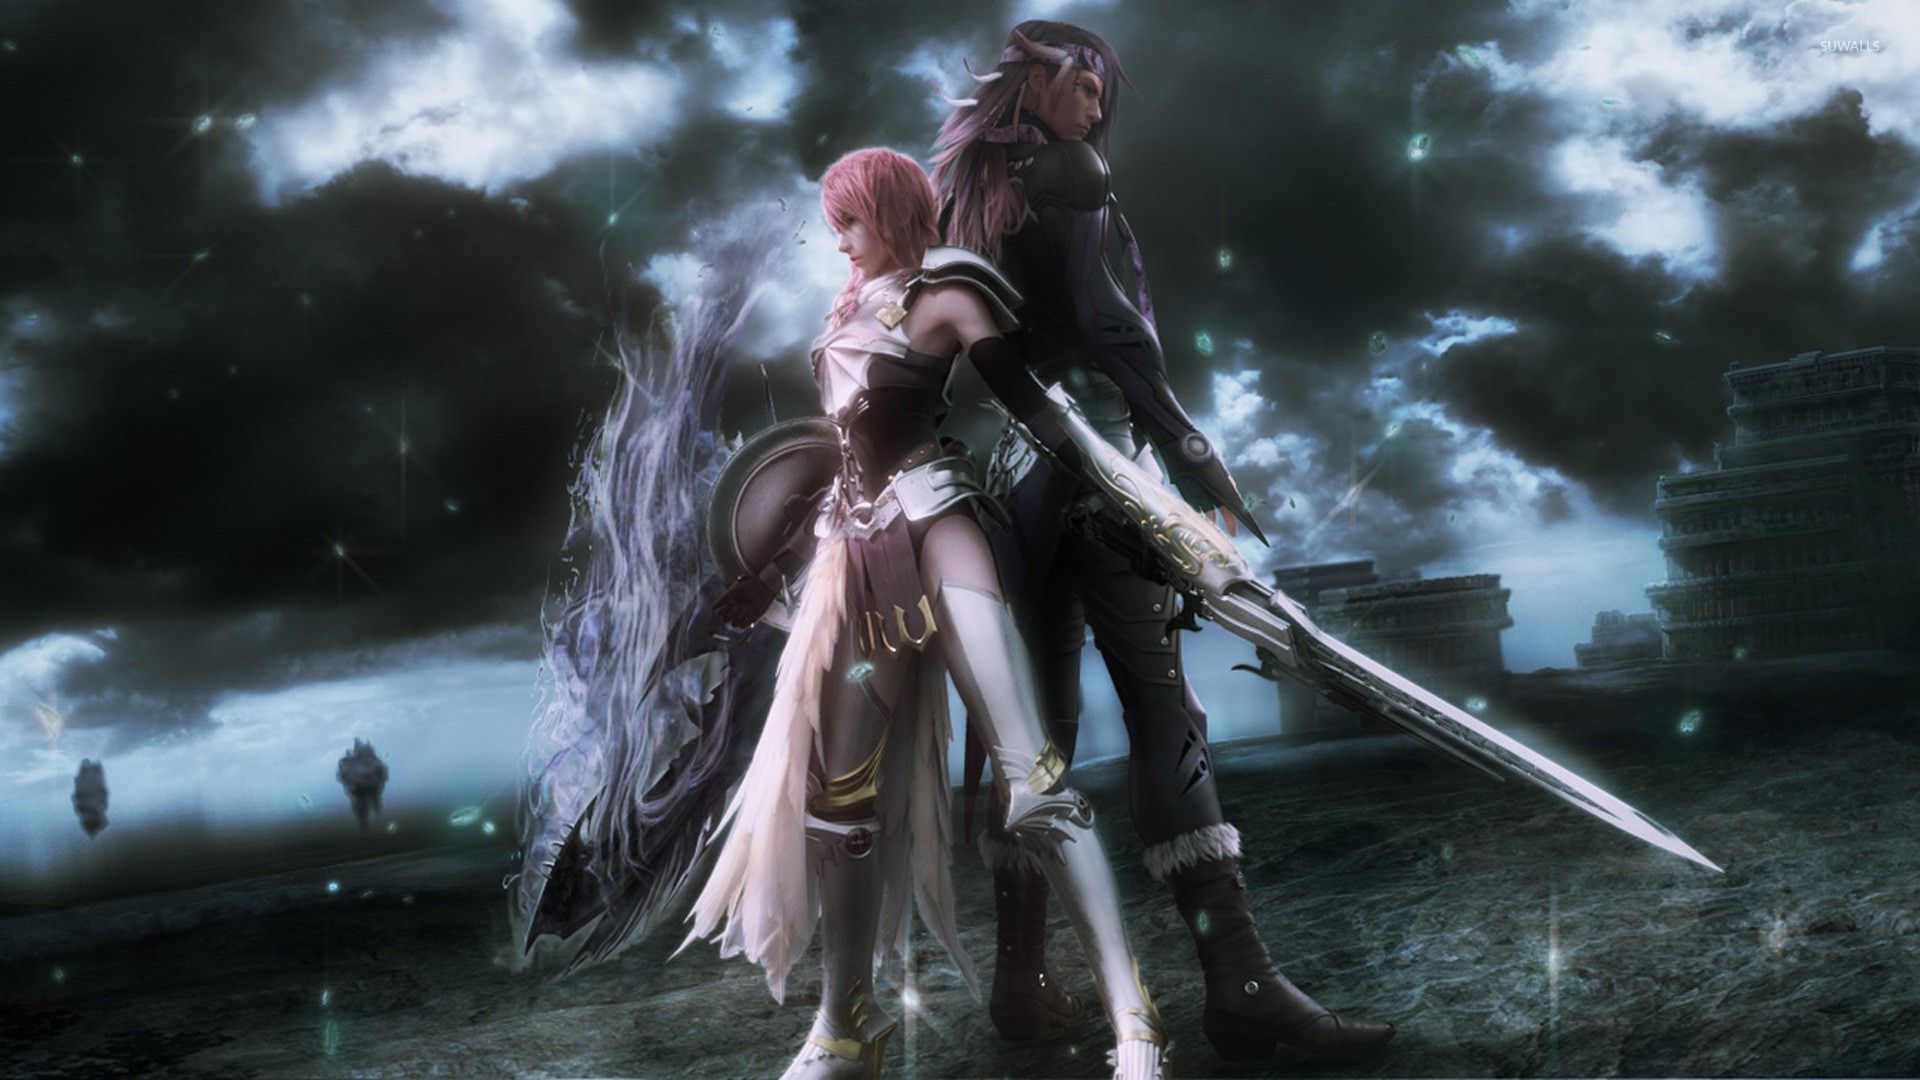 Lightning and Caius   Final Fantasy XIII 2 wallpaper